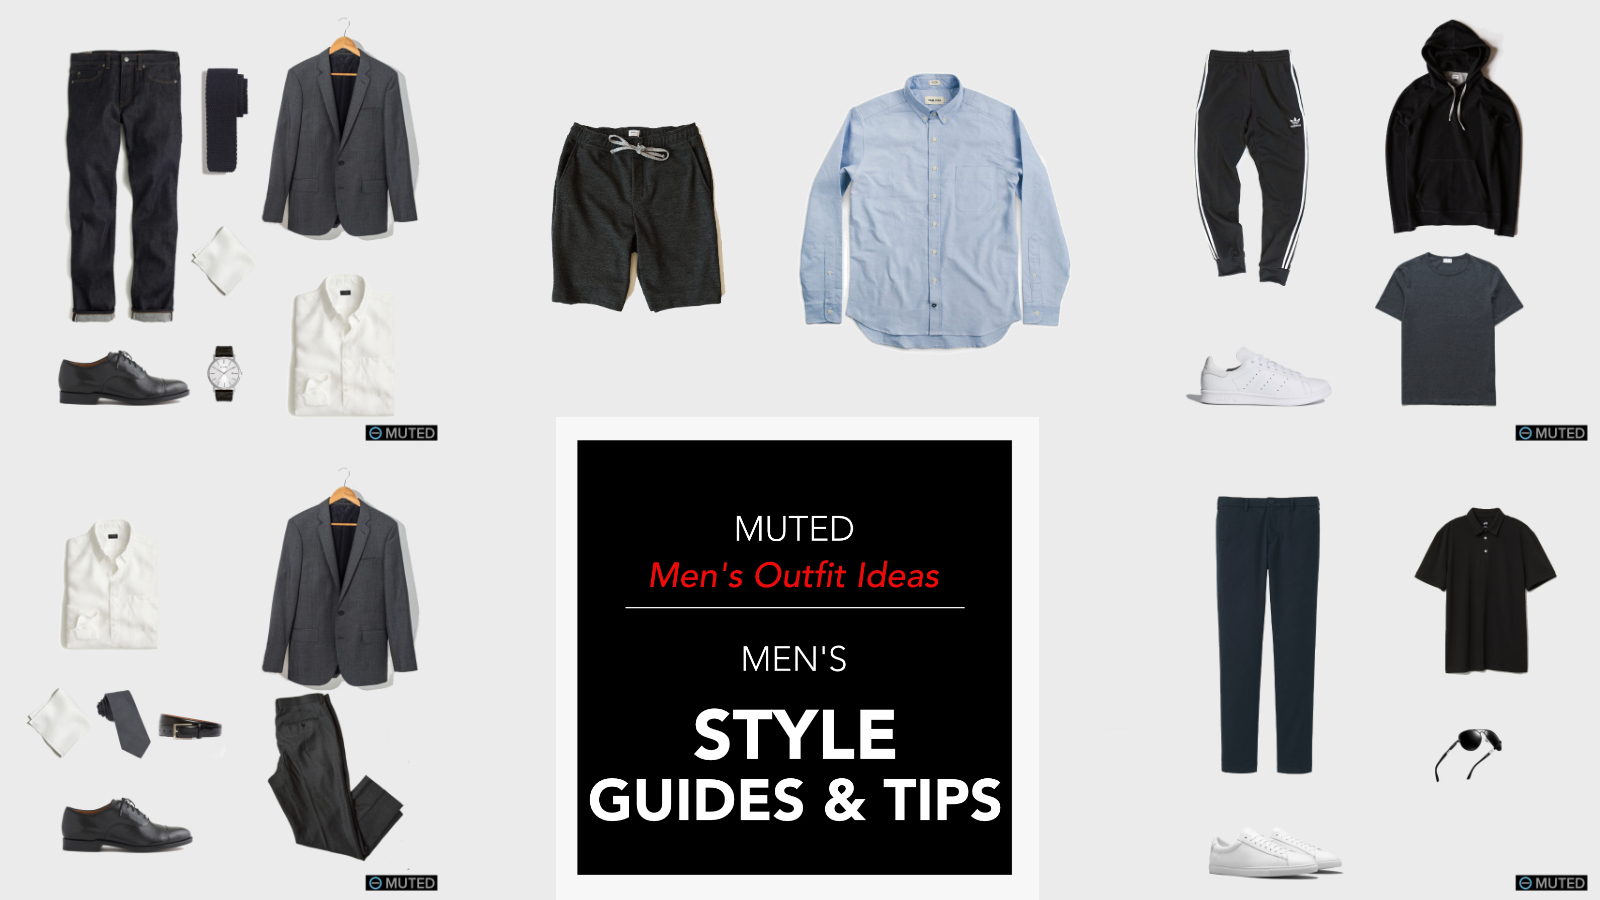 5 of the best mens outfit ideas every guy should own